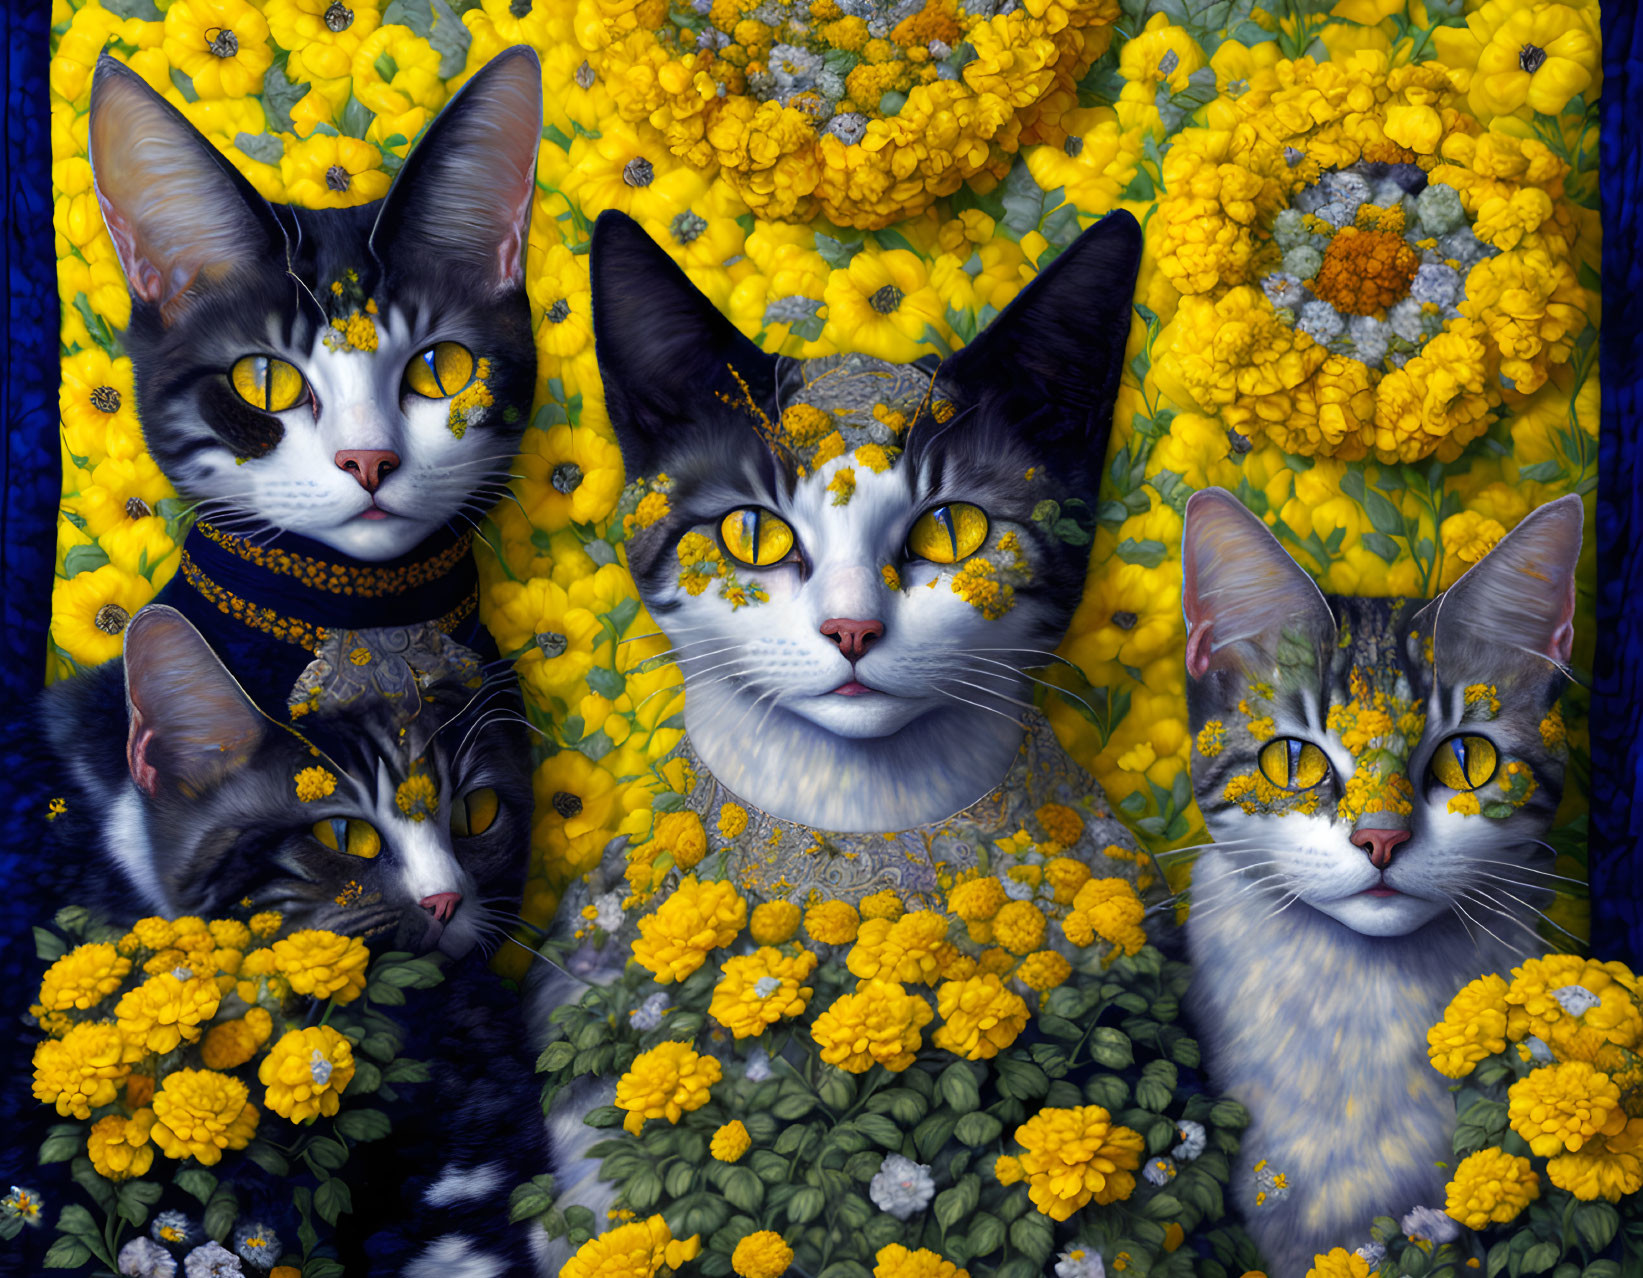 Four Cats with Striking Eyes in Vibrant Yellow Flowers